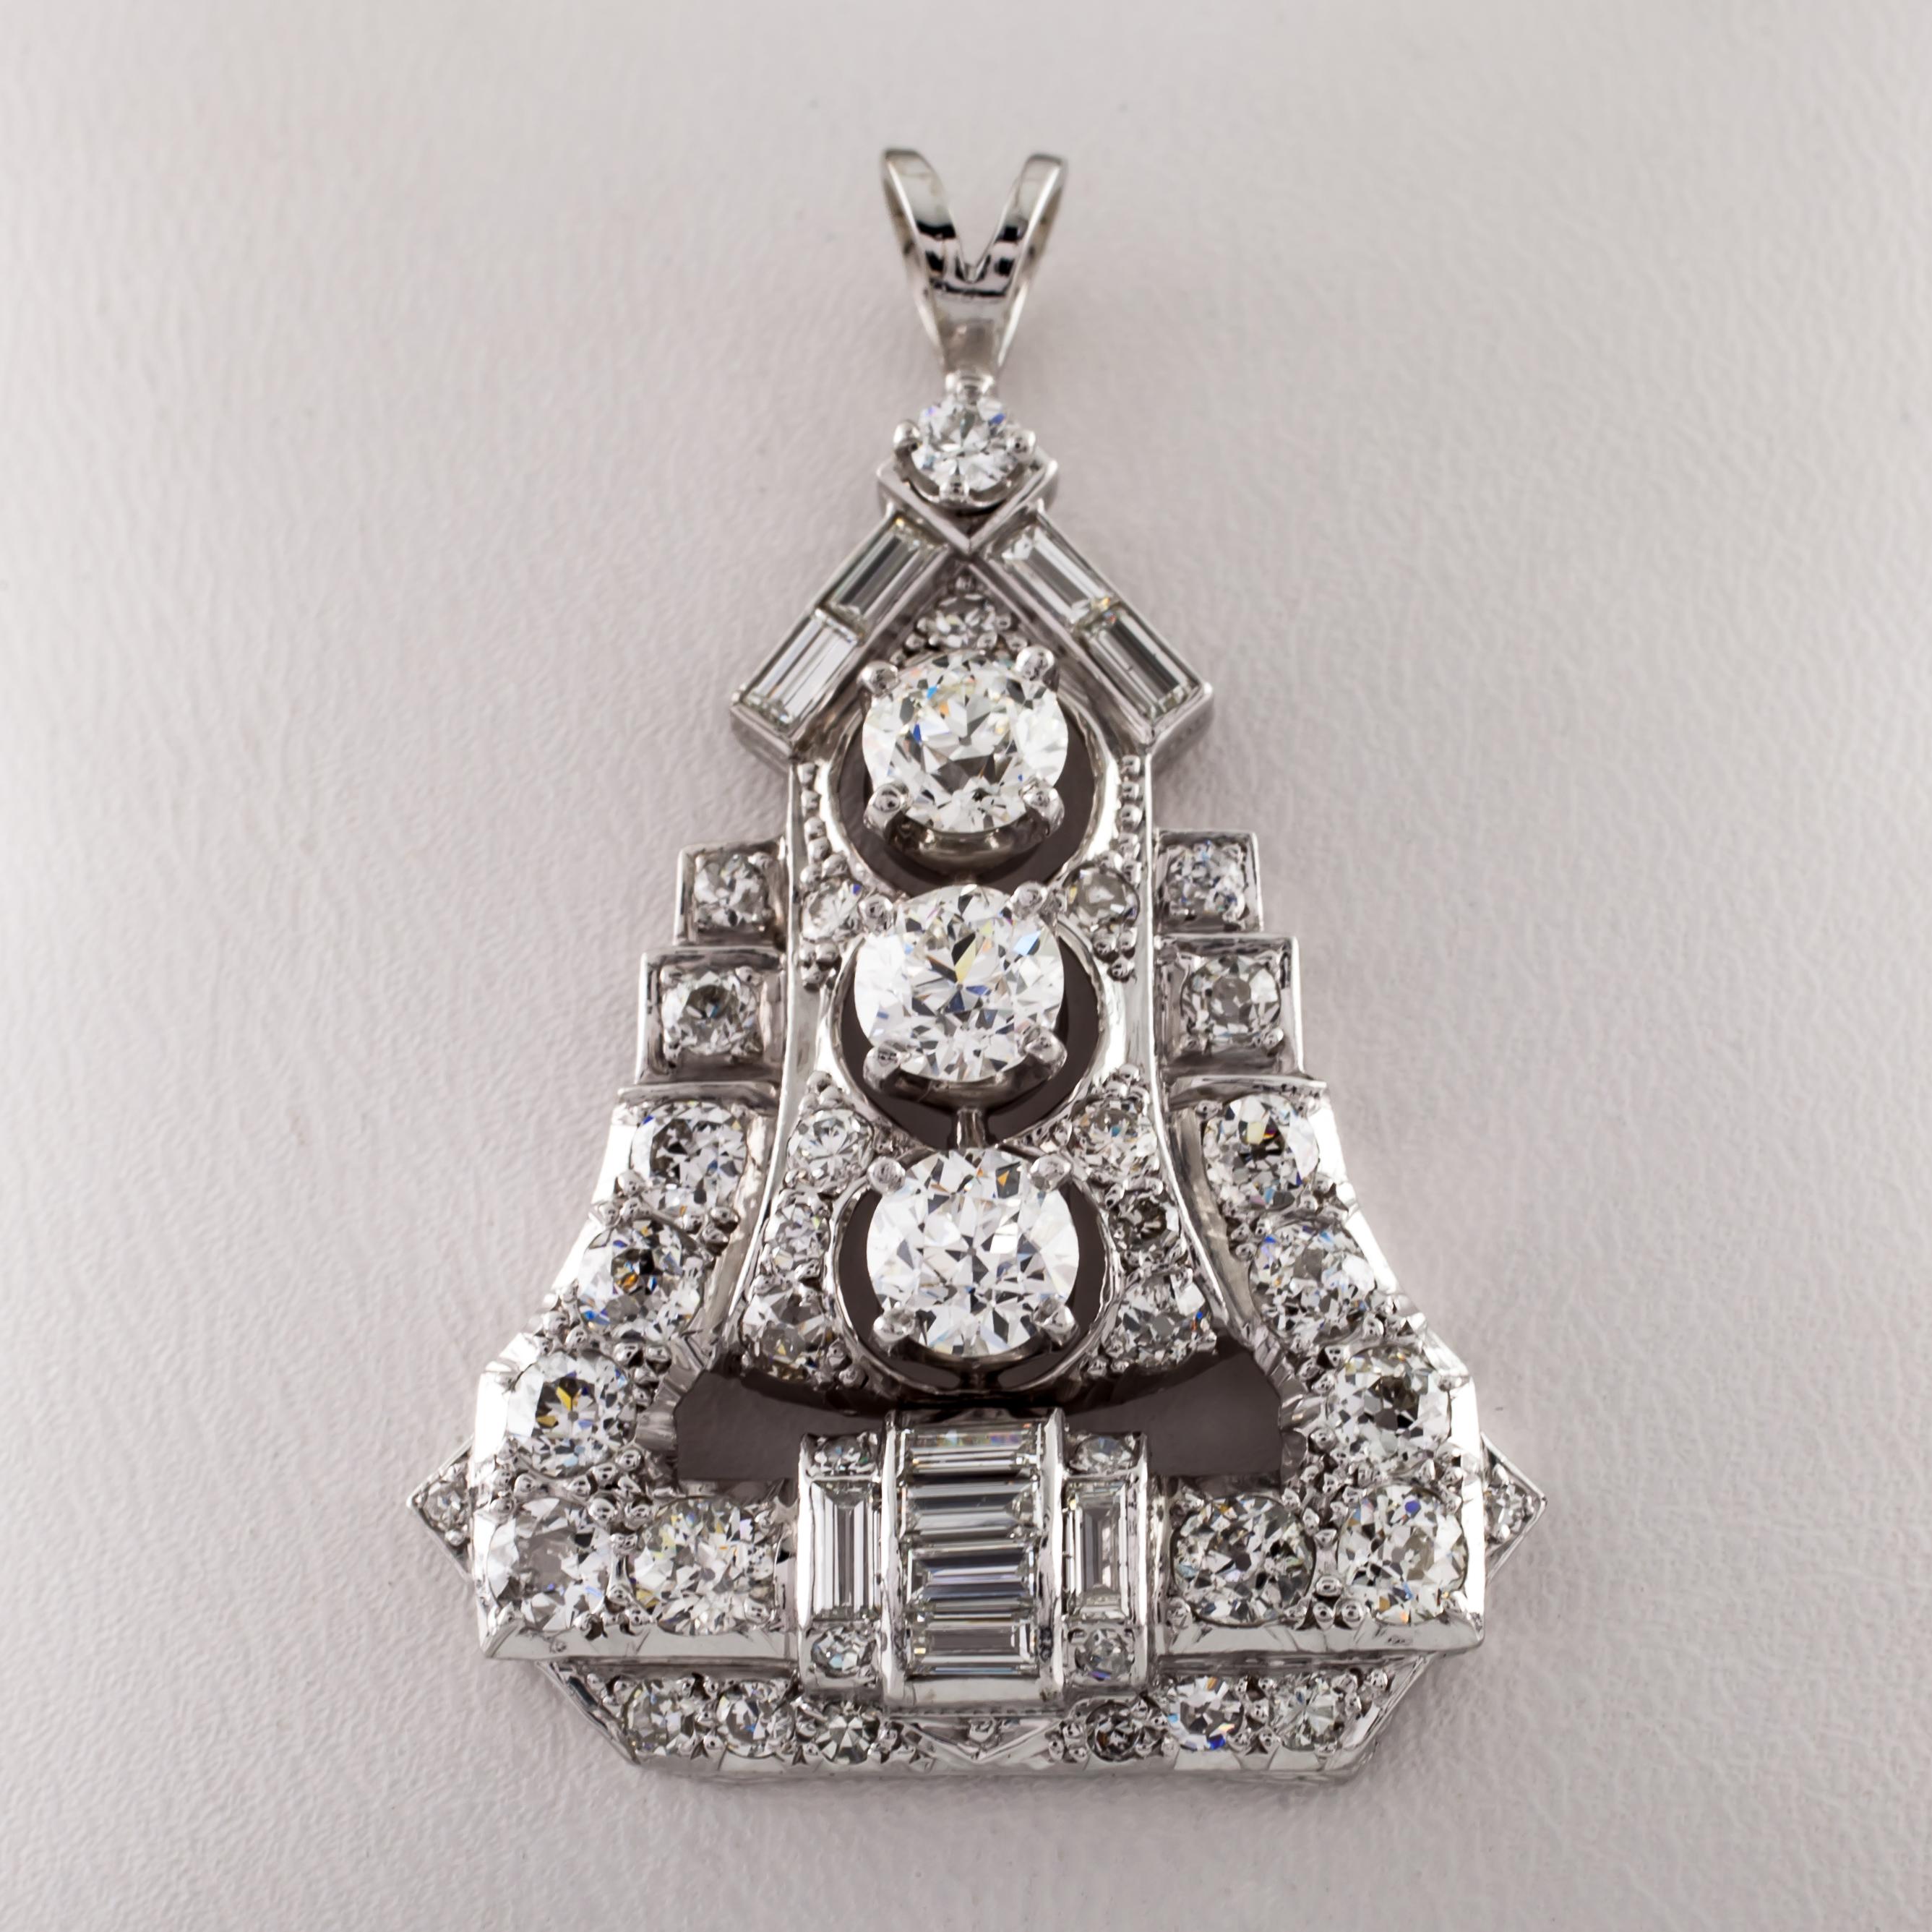 Gorgeous Pagoda Structure Drop Pendant
Platinum Setting
Total Diamond Weight = 4.00 carats
Diamond Color Grade = E - F (colorless) 
Diamond Clarity Grade = VS 
Total Mass = 9.2 grams
Size of pendant = 1.50 inches  x 1.00 inches